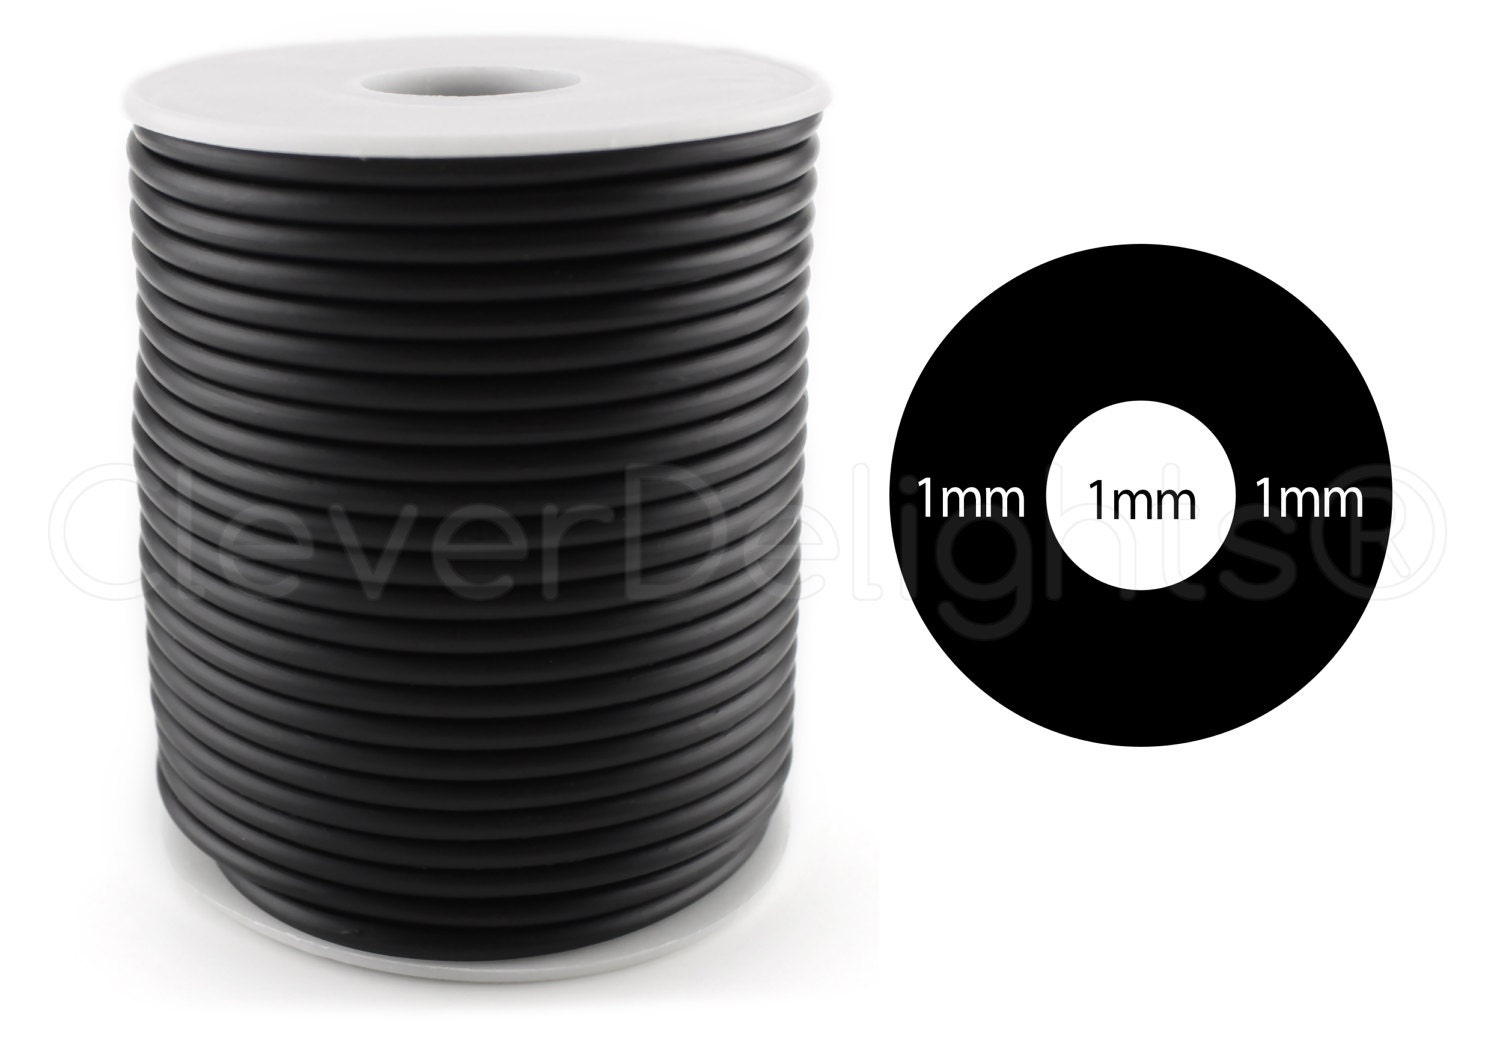 CleverDelights Black Solid Rubber Cord - 30 Feet - 3mm (3/32) Round - Crafts Beading Jewelry Necklaces